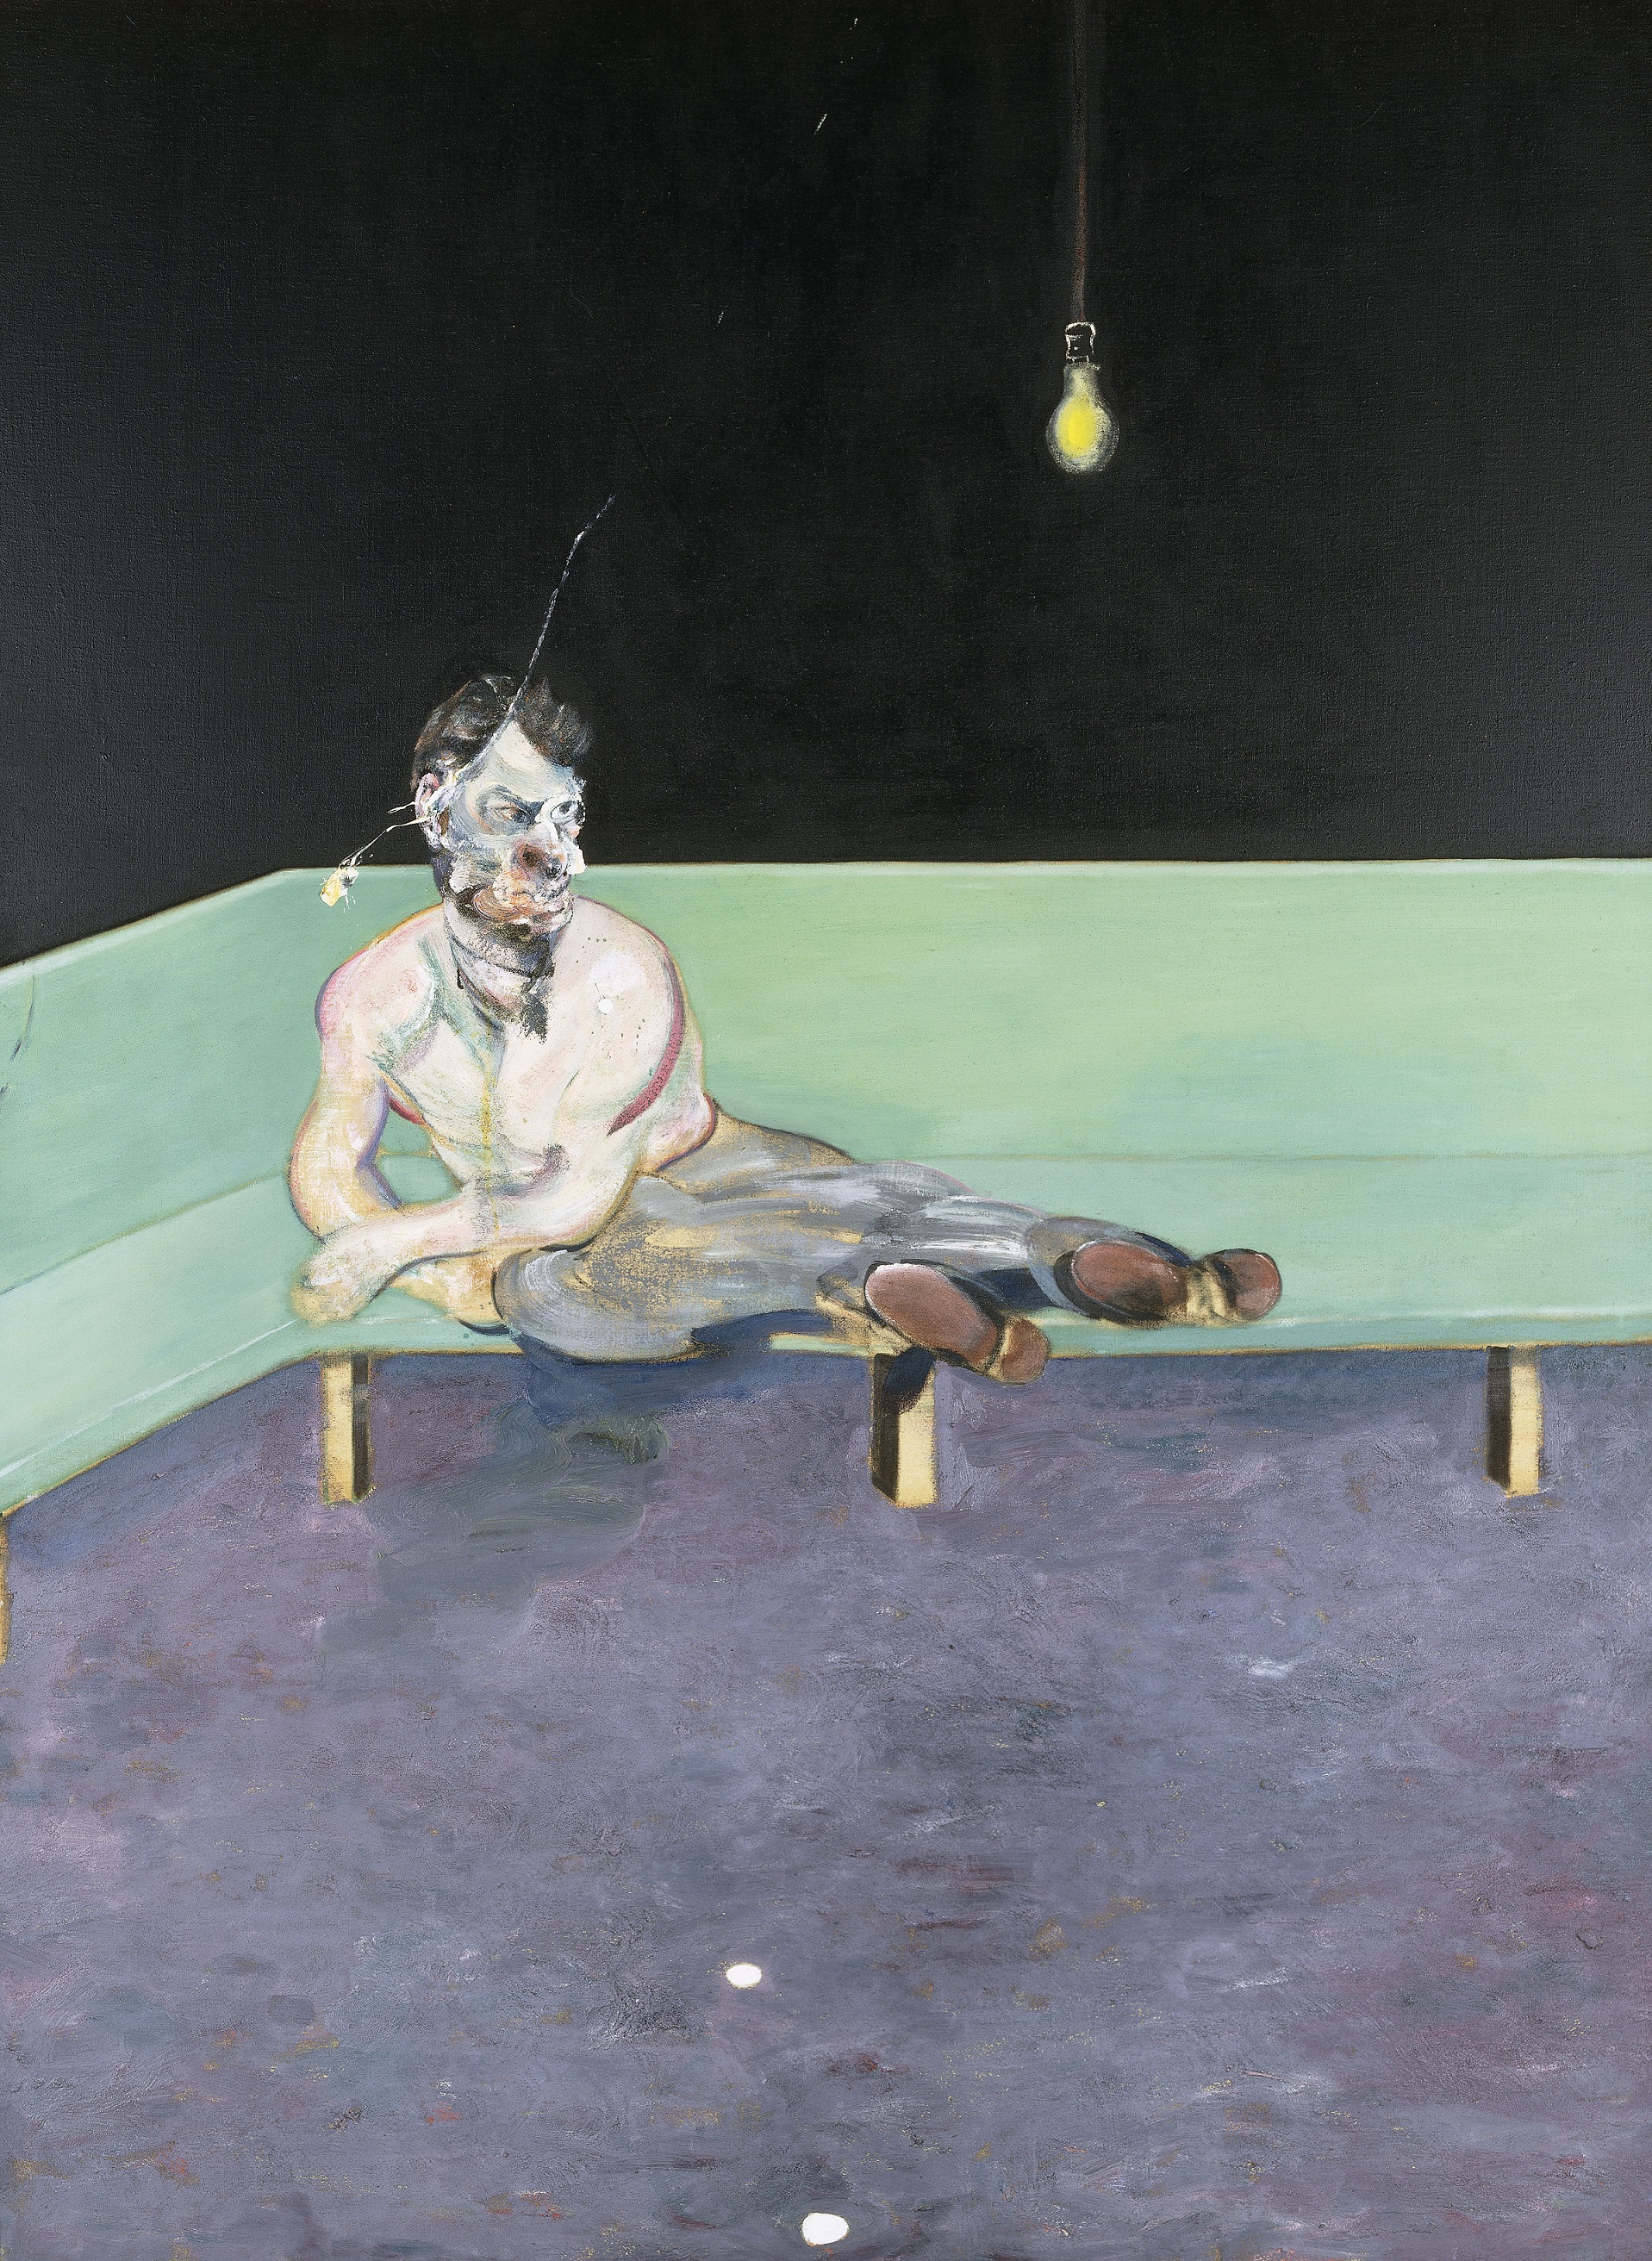 Francis Bacon, 1909-1992 |Study for Portrait of Lucian Freud | 1964 | Oil paint on canvas 1980 x 1476 mm | The Lewis Collection | © The Estate of Francis Bacon. All rights reserved. DACS, London Photo: Prudence Cuming Associates Ltd.